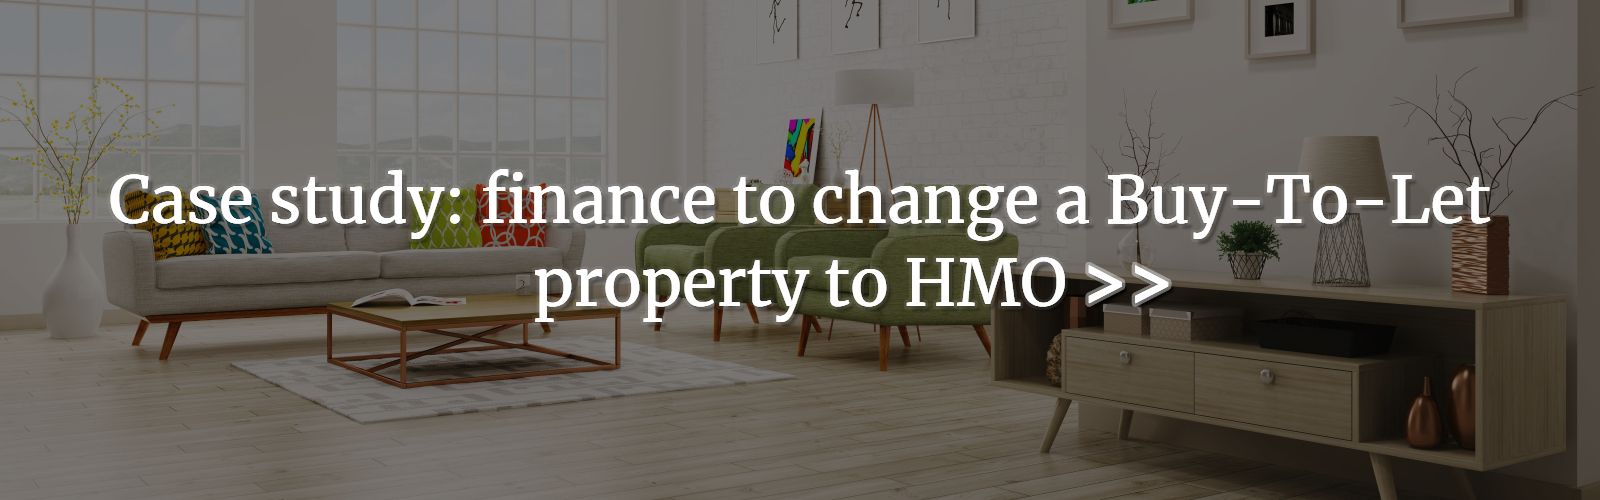 FINANCE-TO-CHANGE-BUY-TO-LET-PROPERTY-TO-HMO